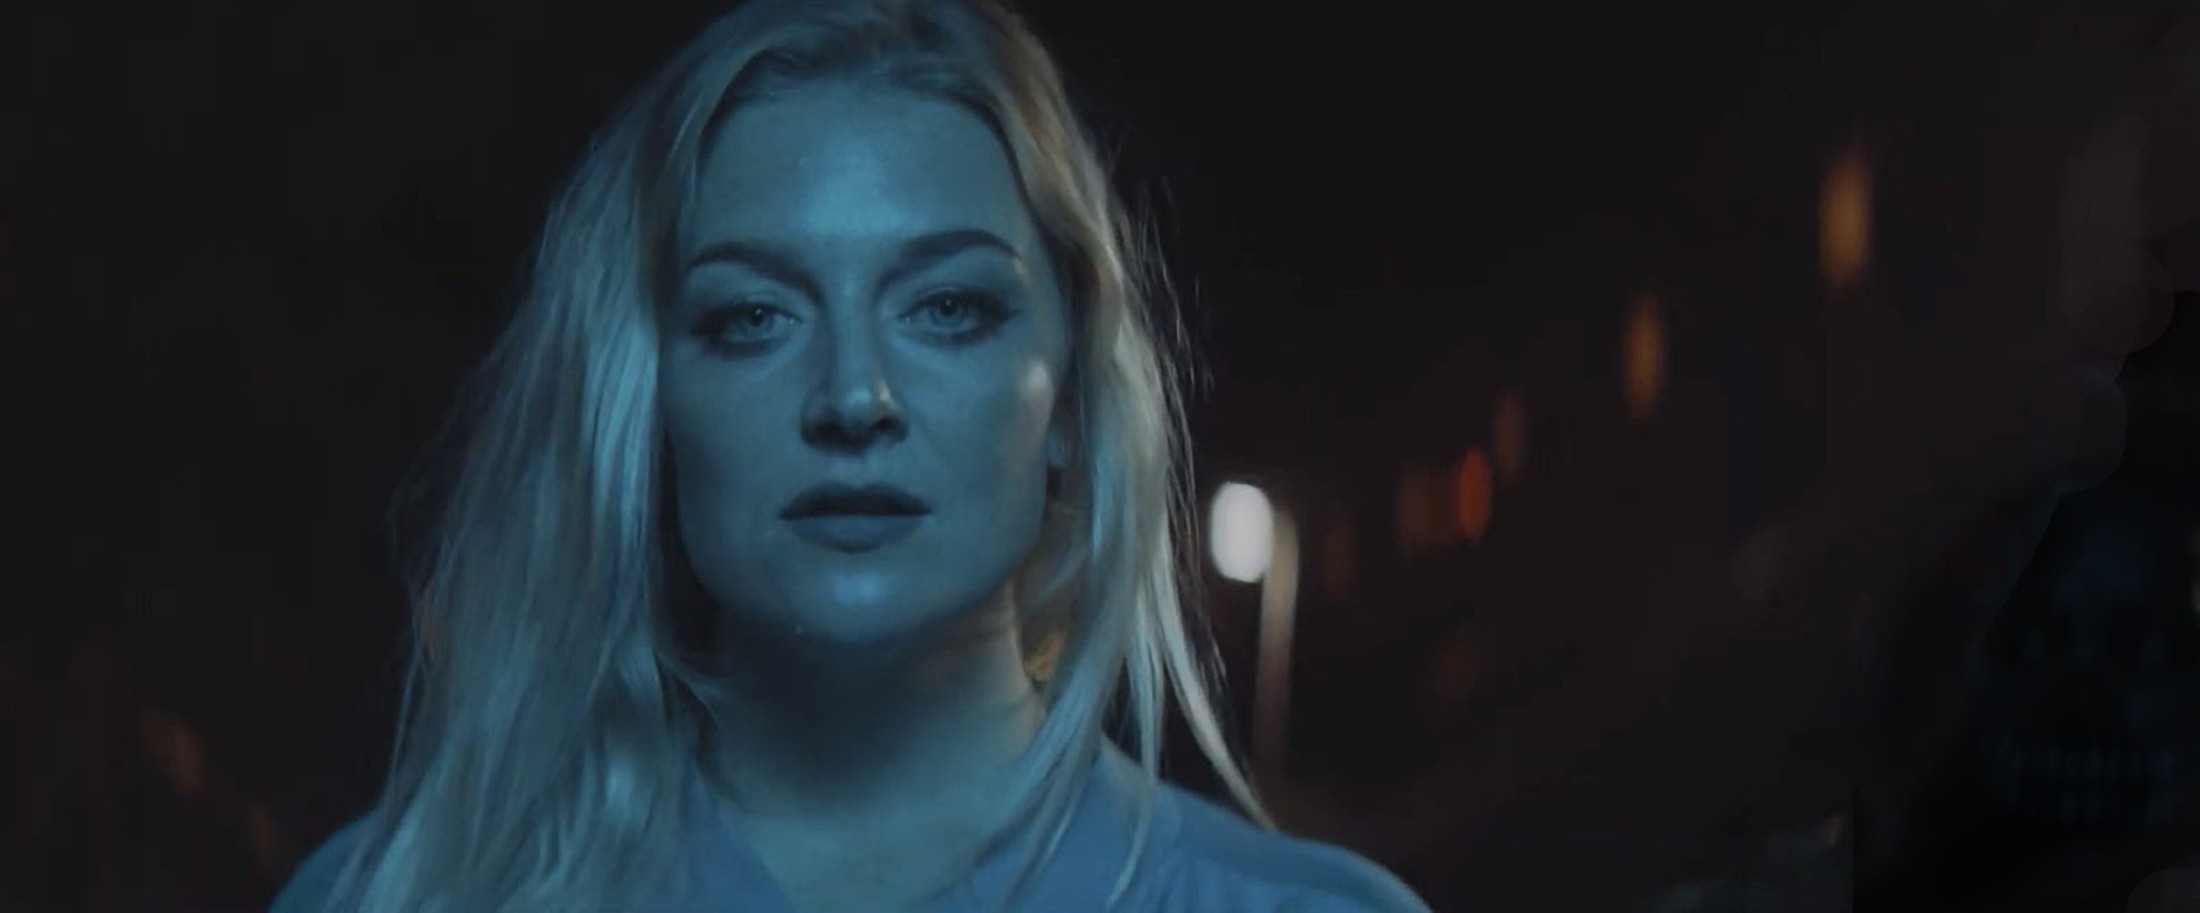 Screenshot of Emily during the MIND video by Tusks